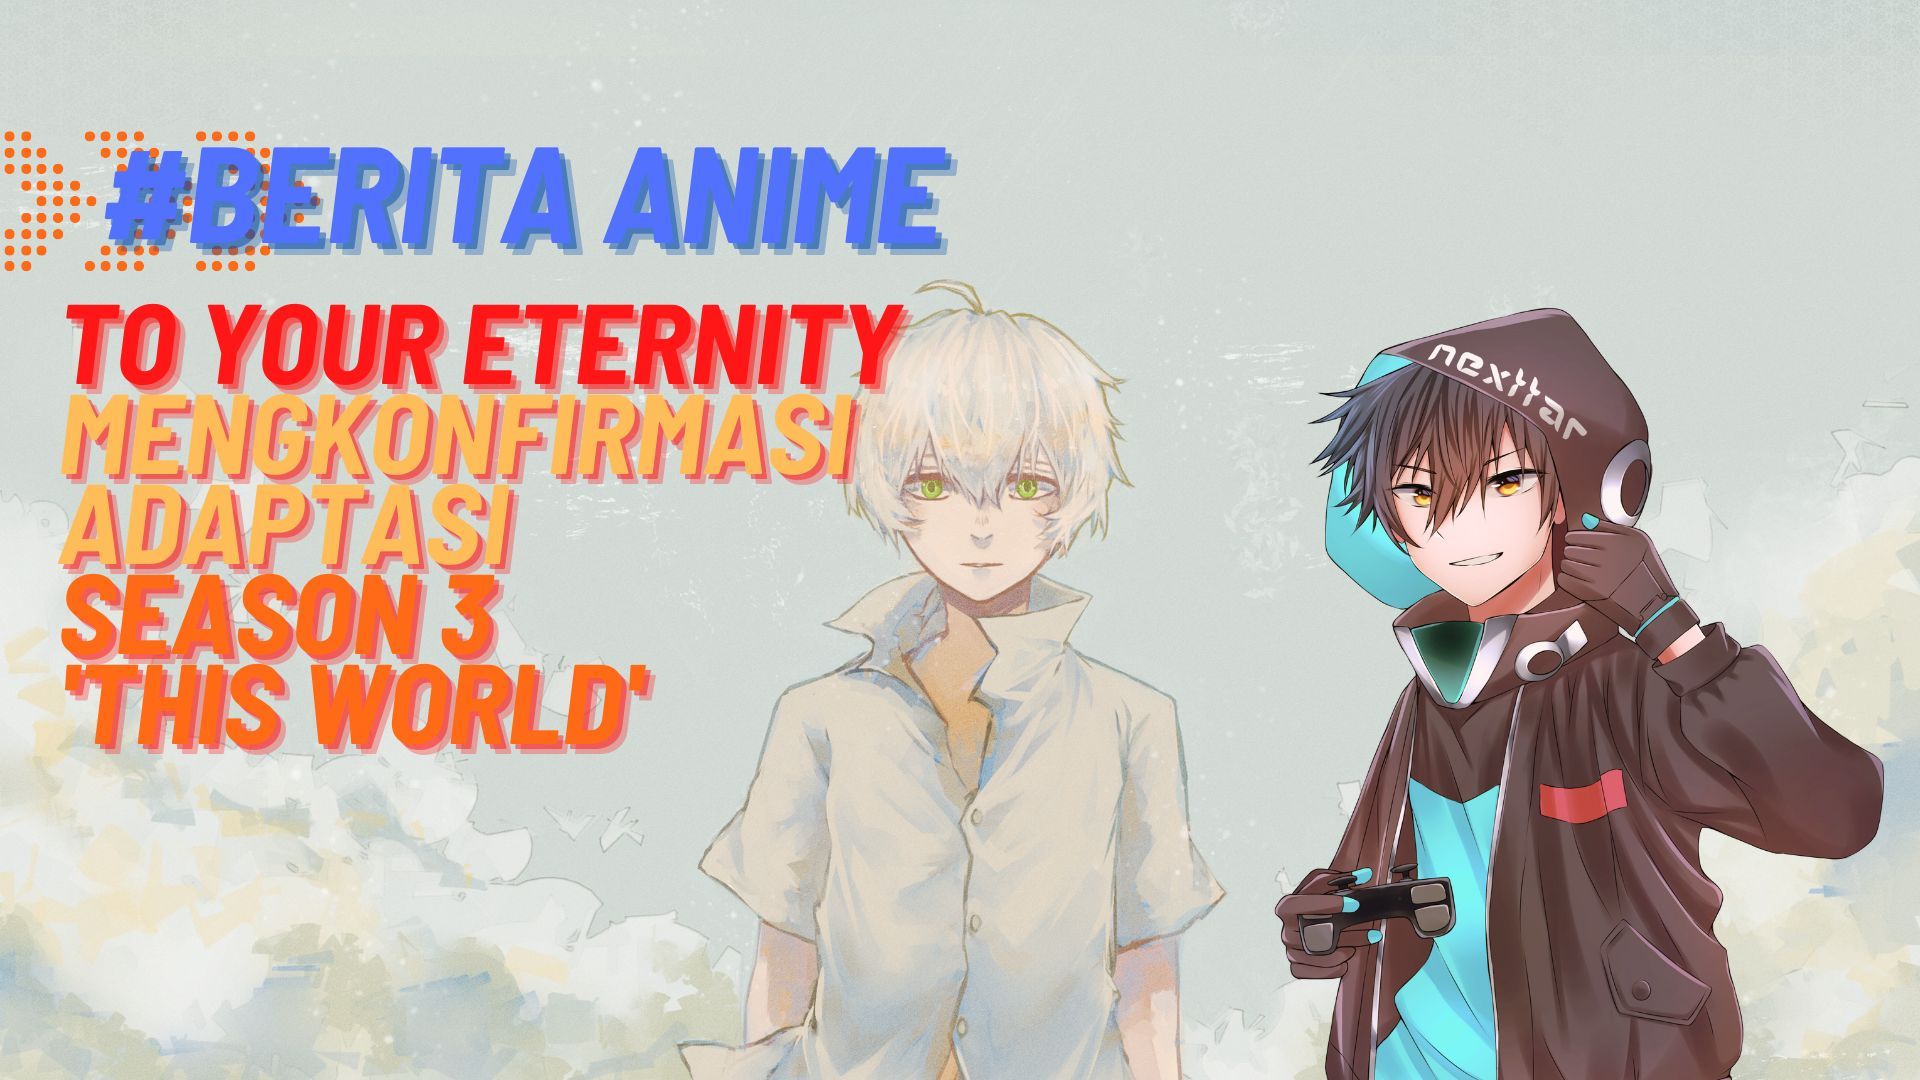 To Your Eternity Season 3 Release Date Updates